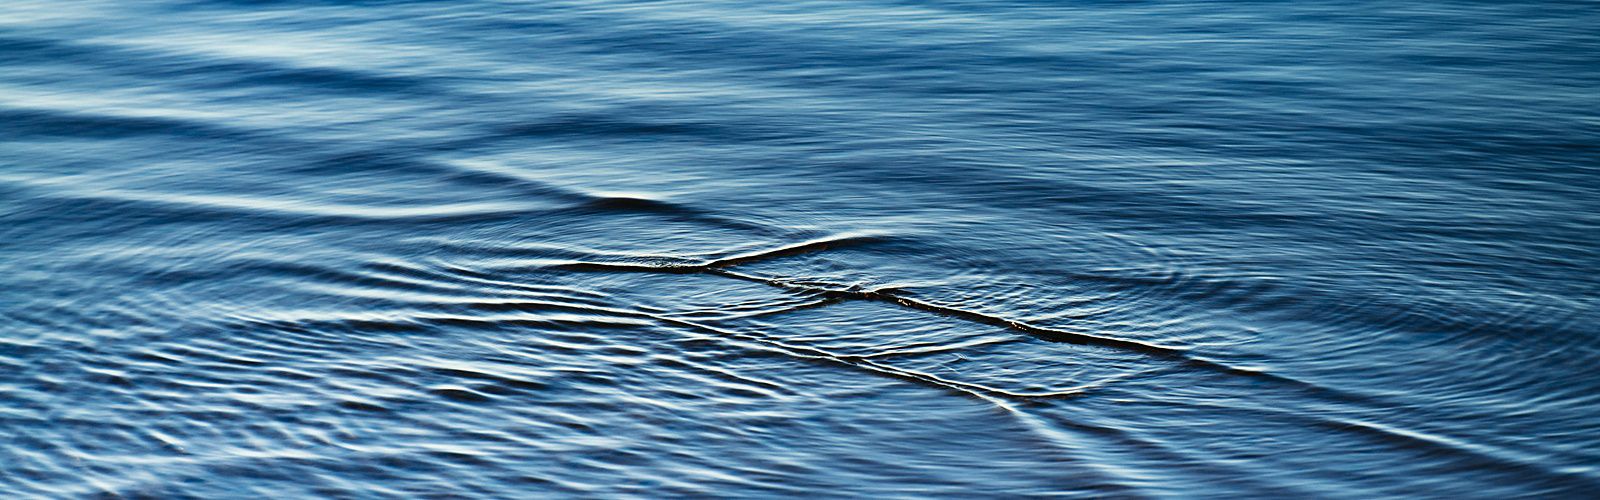 Close picture of rippling water.